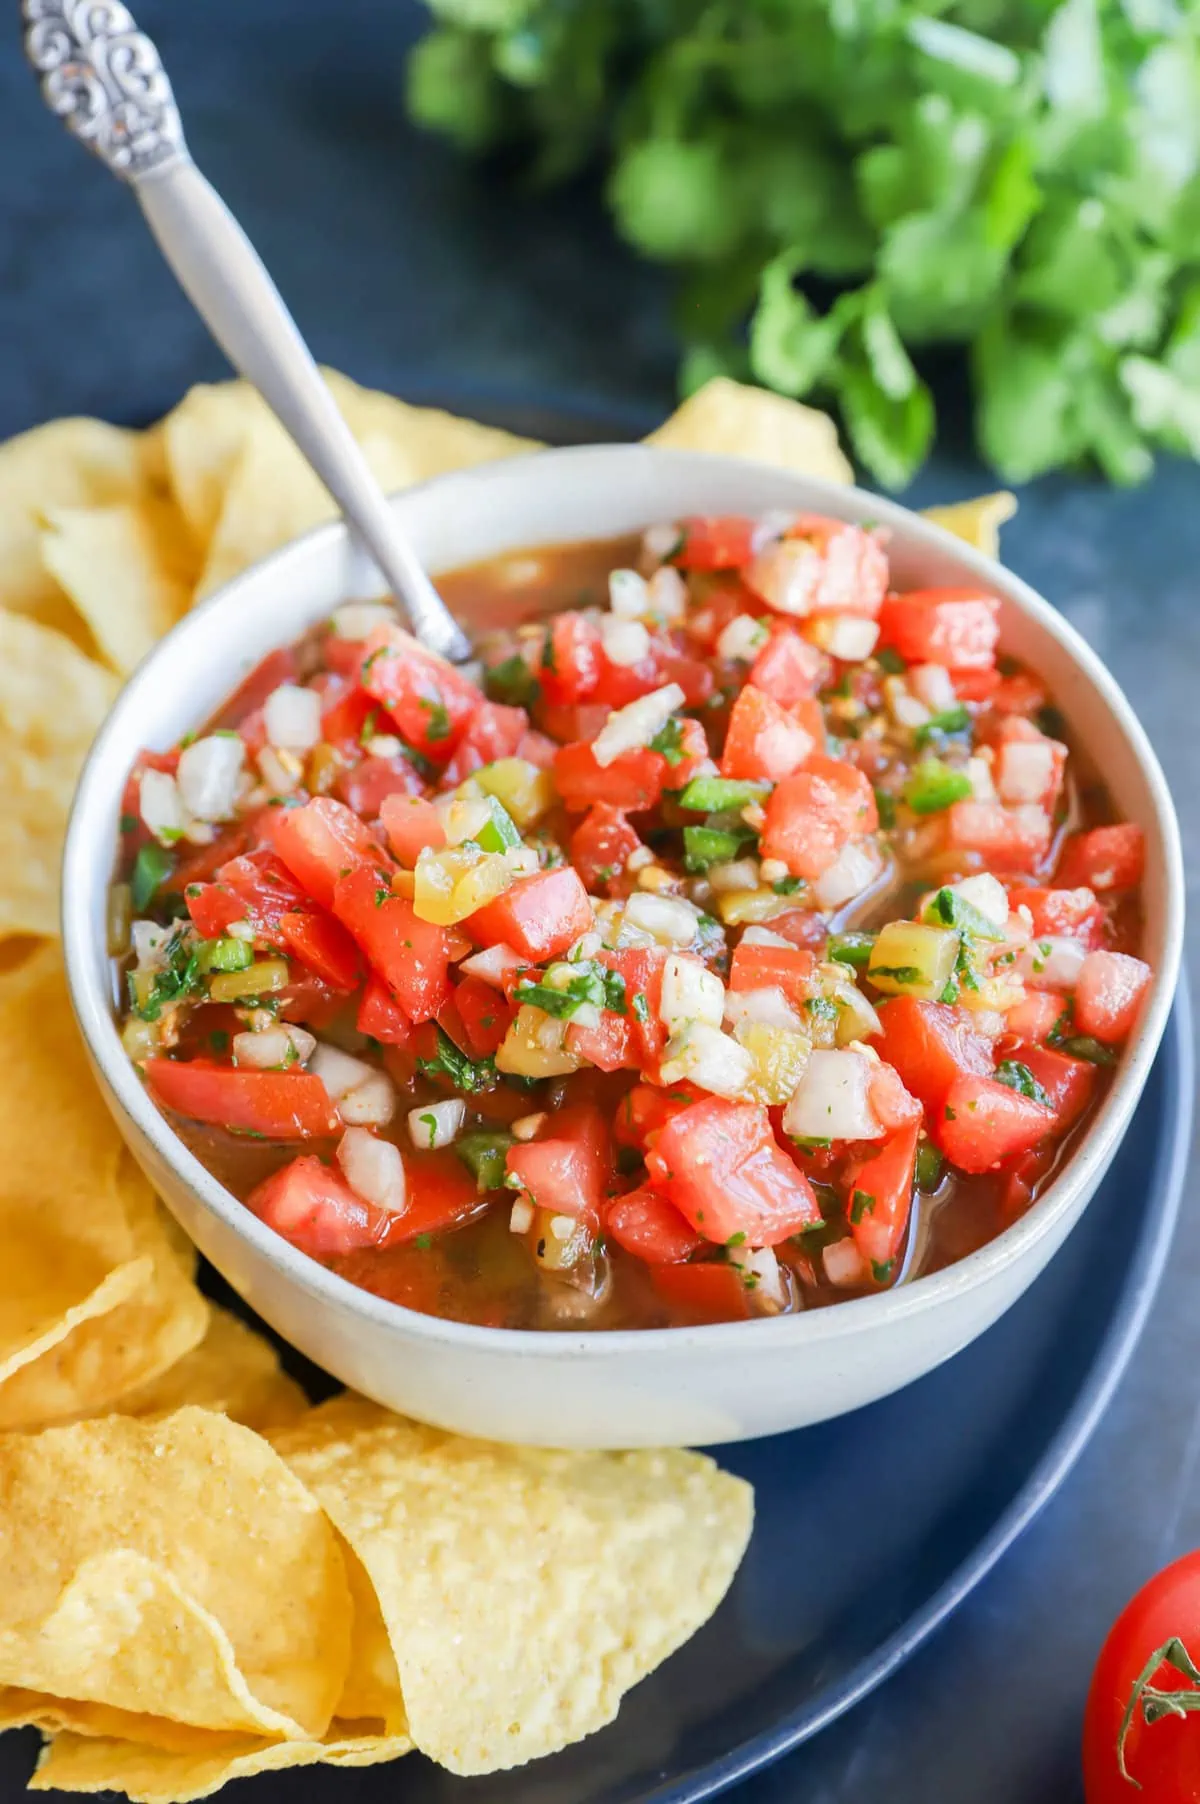 Spoon in bowl of salsa with chips